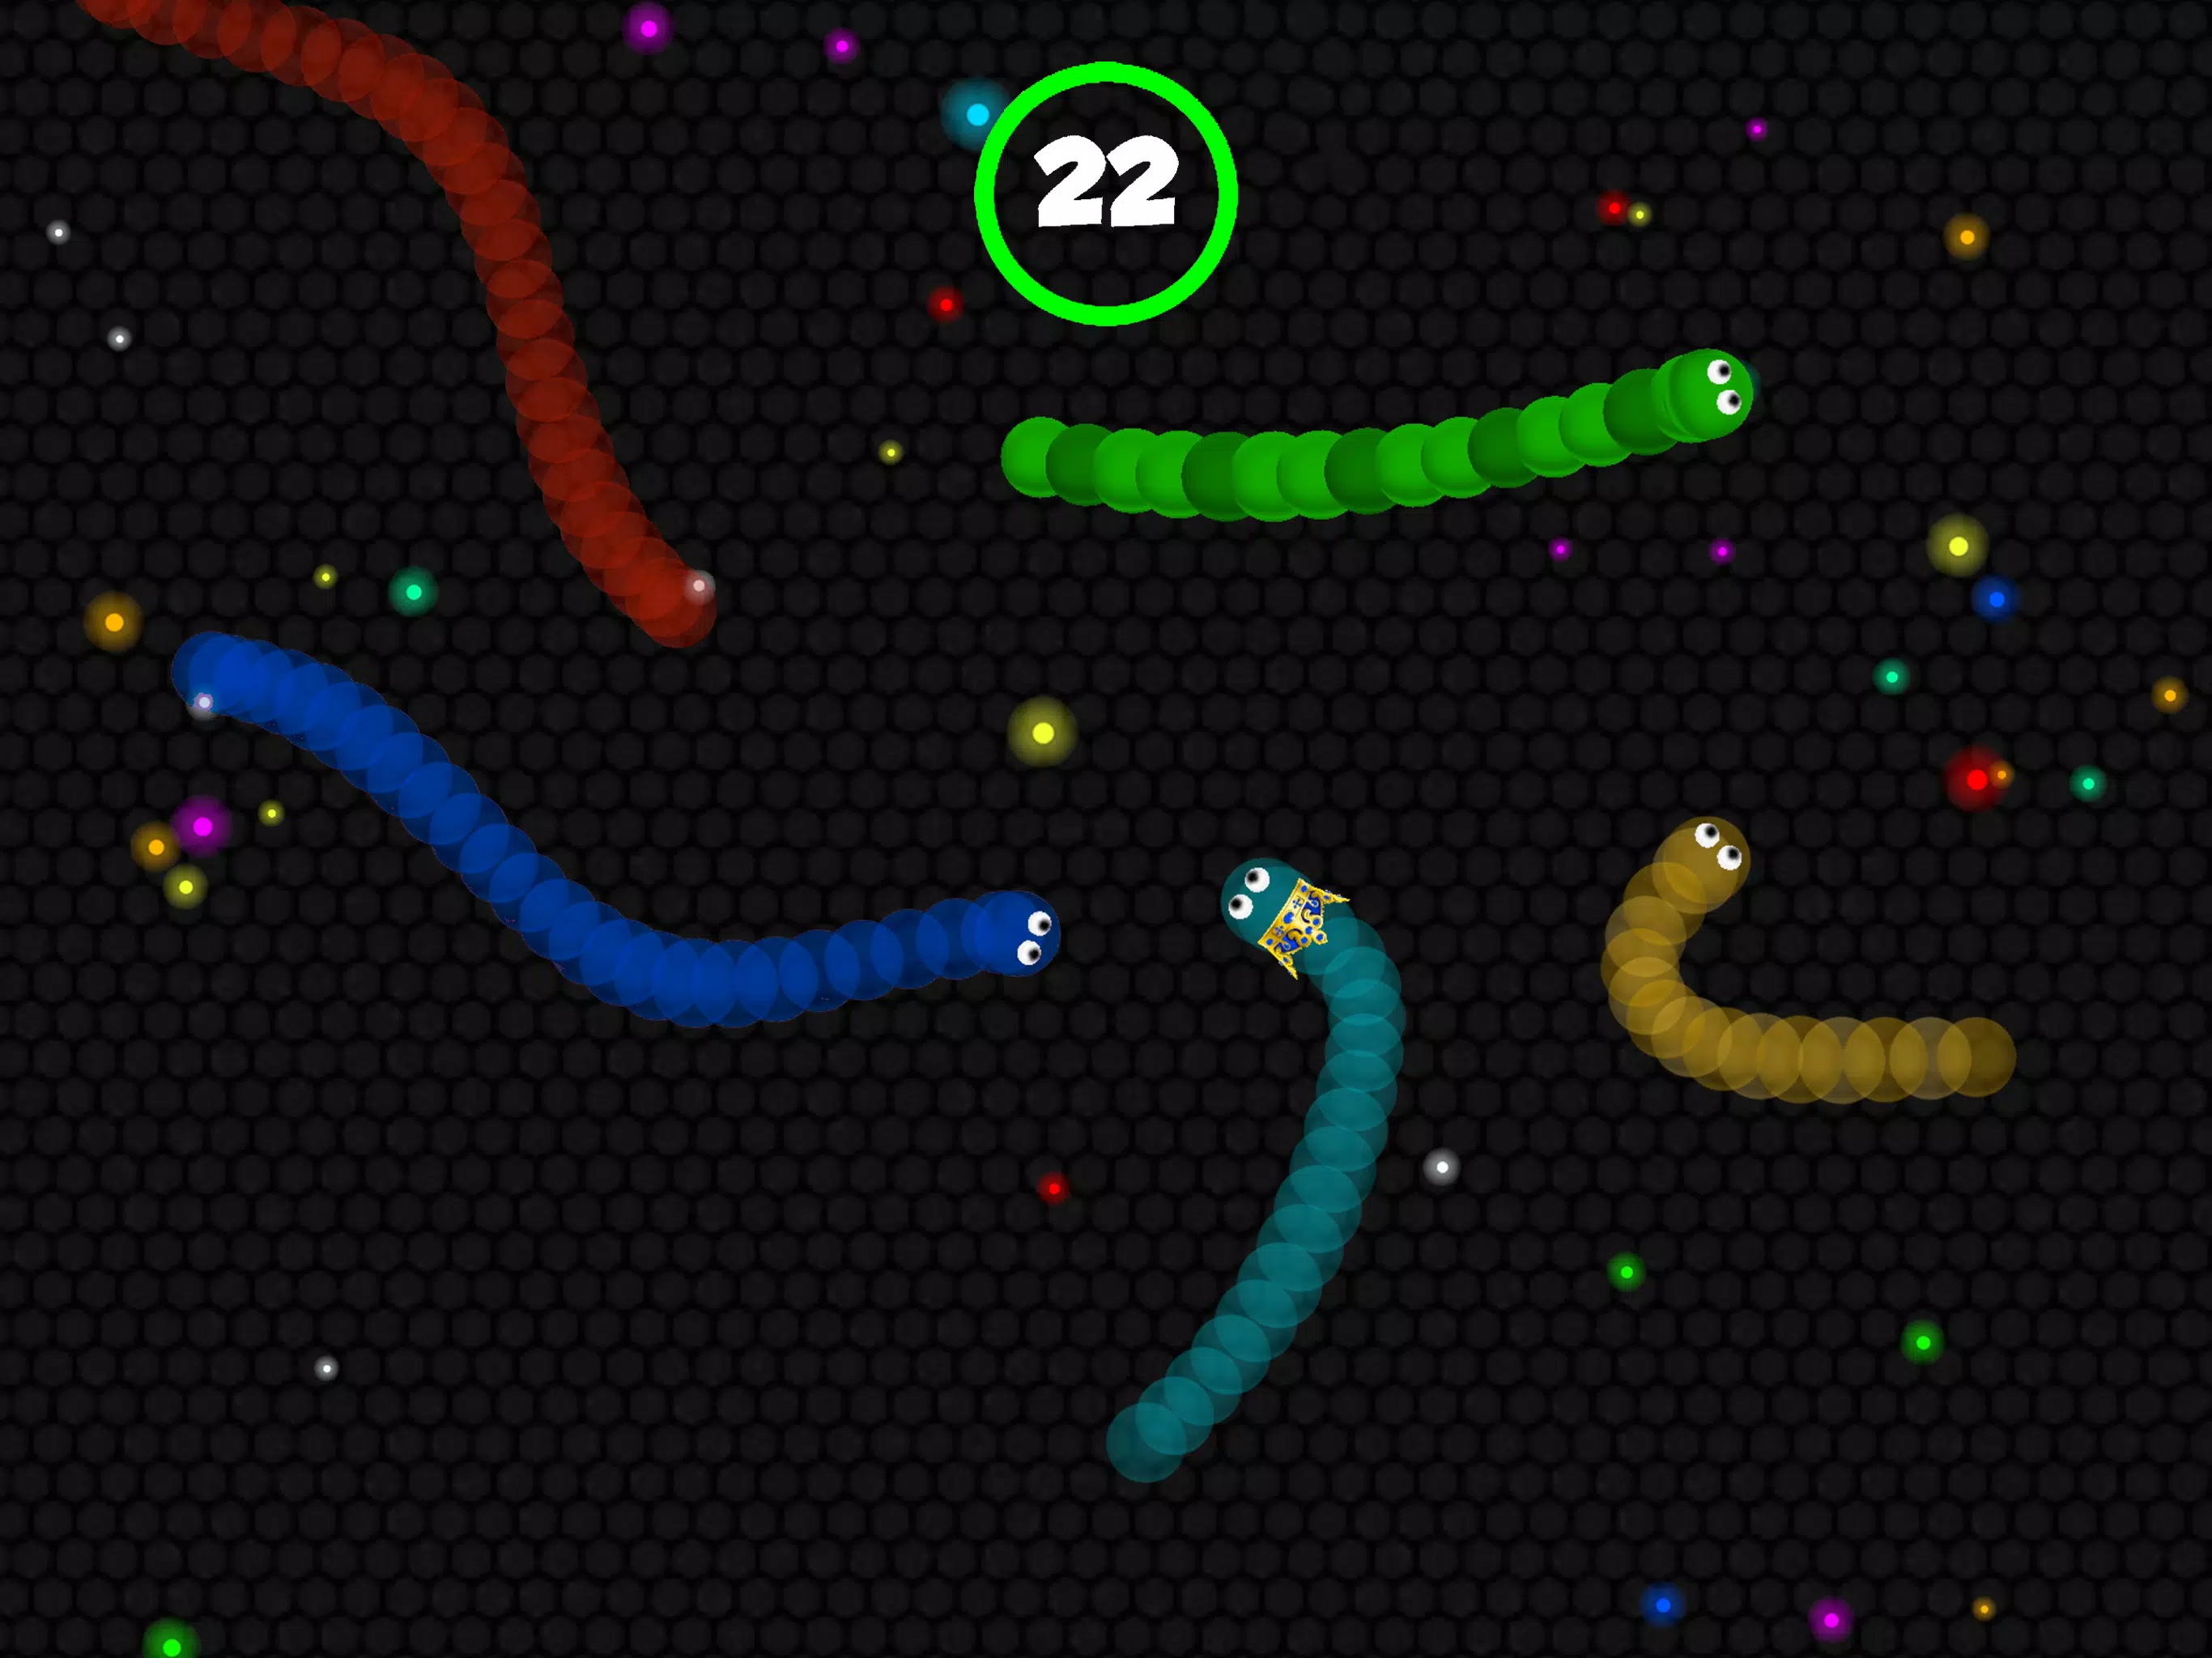 Download Snake Zone .io: Fun Worms Game MOD APK v4.8.0 for Android